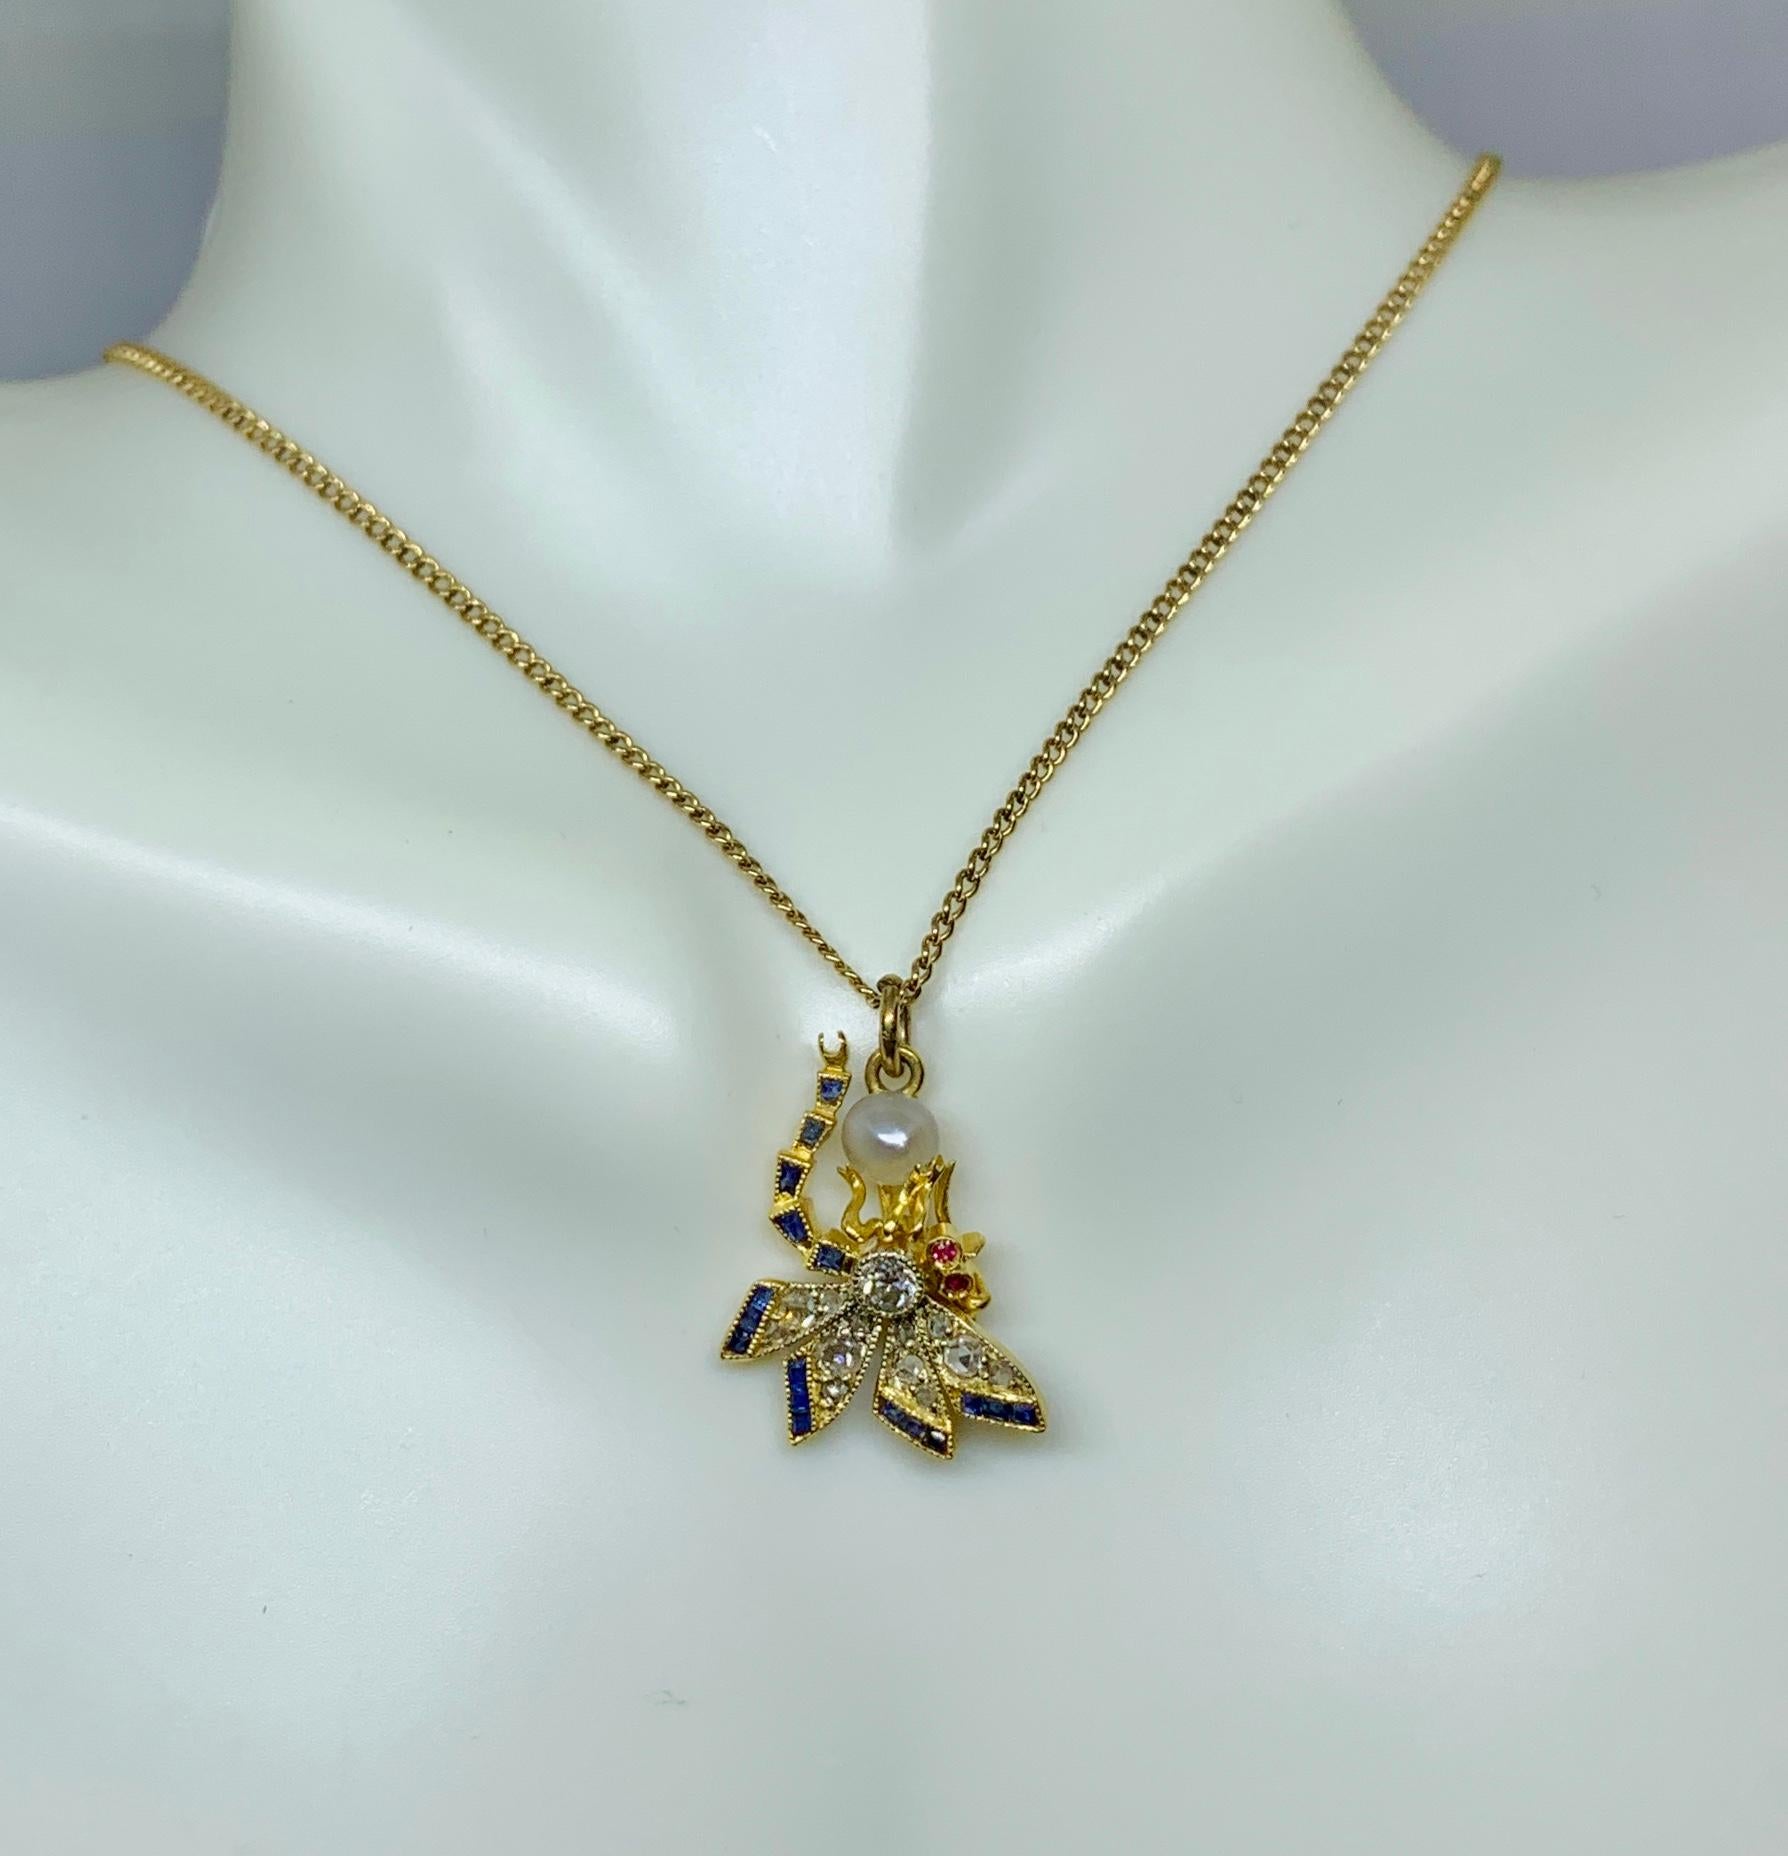 This is a stunning Art Nouveau - Art Deco Rose Cut and Old MIne Cut Diamond, Sapphire, Ruby and Pearl Dragonfly Insect Pendant Necklace and chain in 14 Karat Gold.  The magnificent dragonfly has a central Old Mine Cut Diamond of great beauty.  The